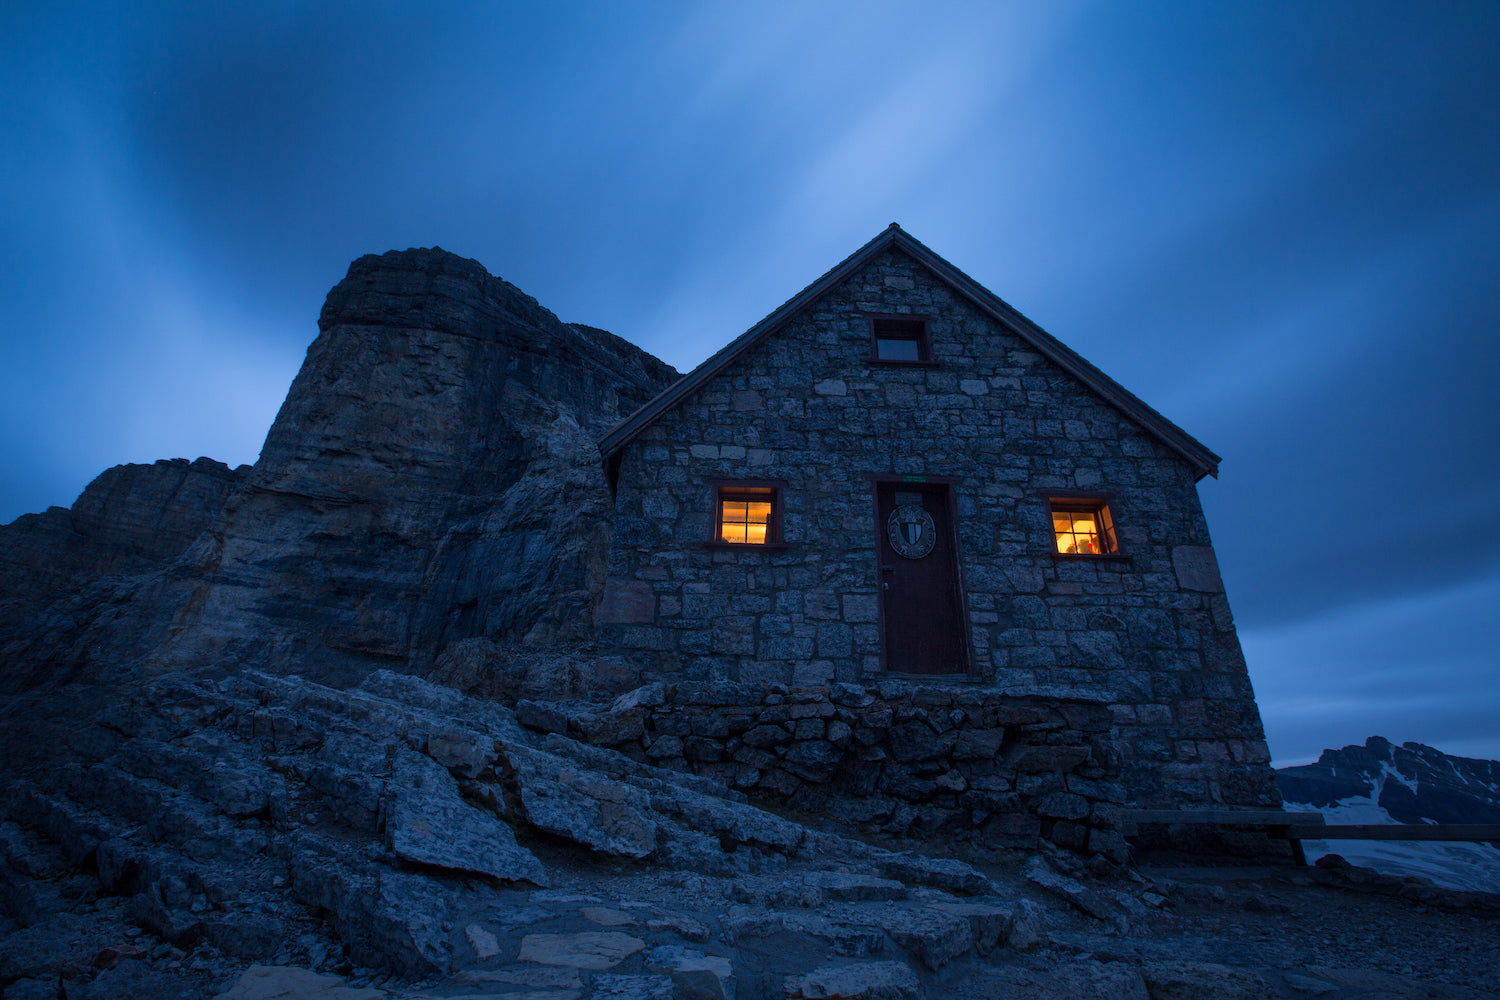 Home for Mountaineers (Abbot Pass Hut)